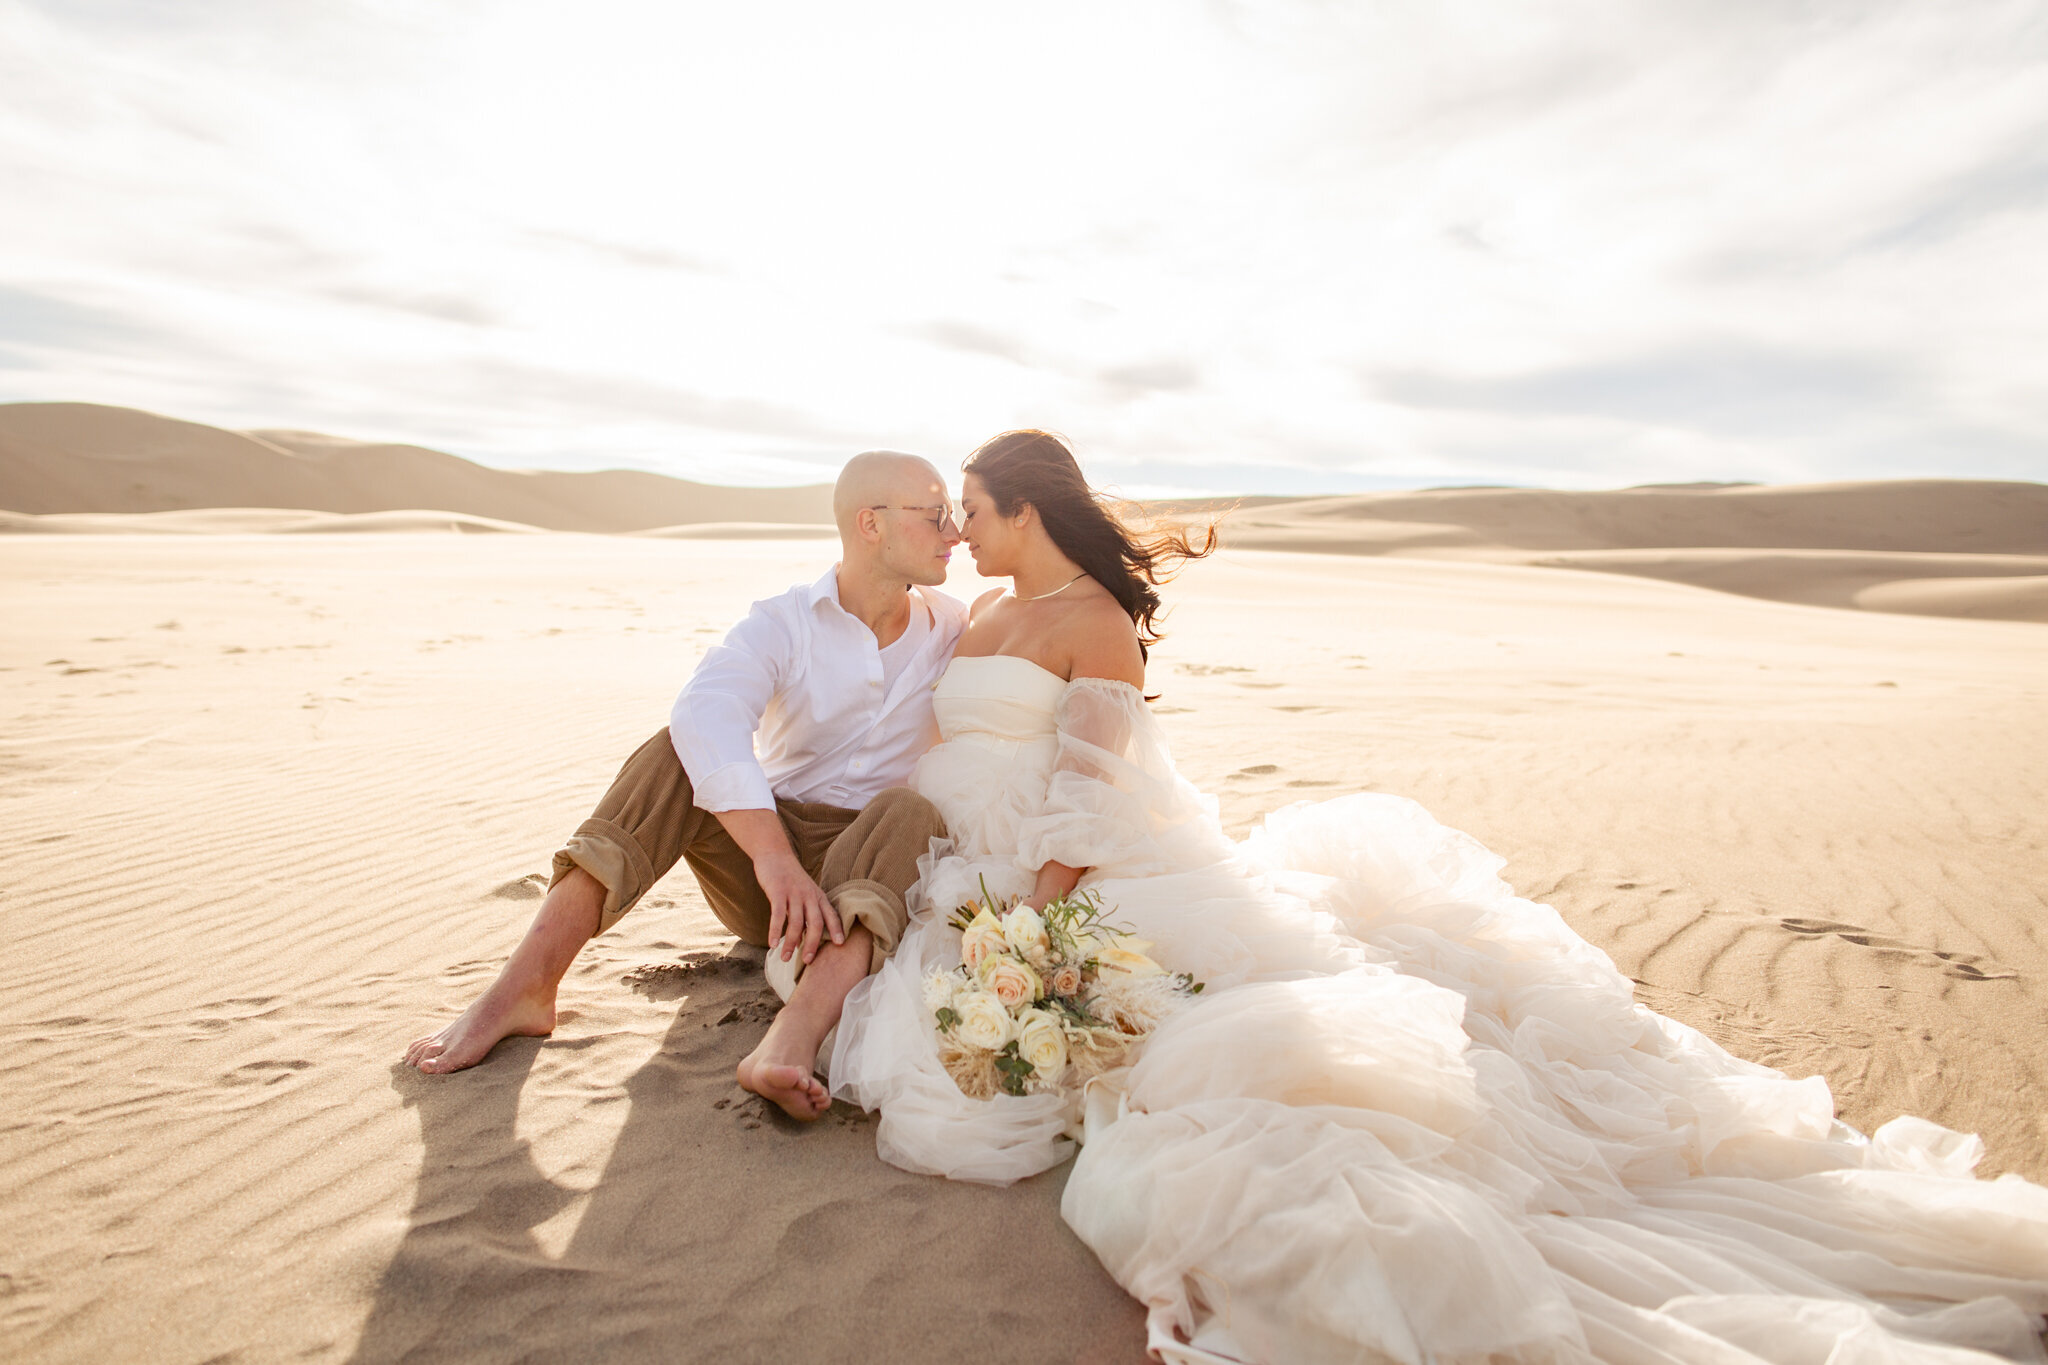 The bride and groom sit next to each other on the sand at the sand dunes.